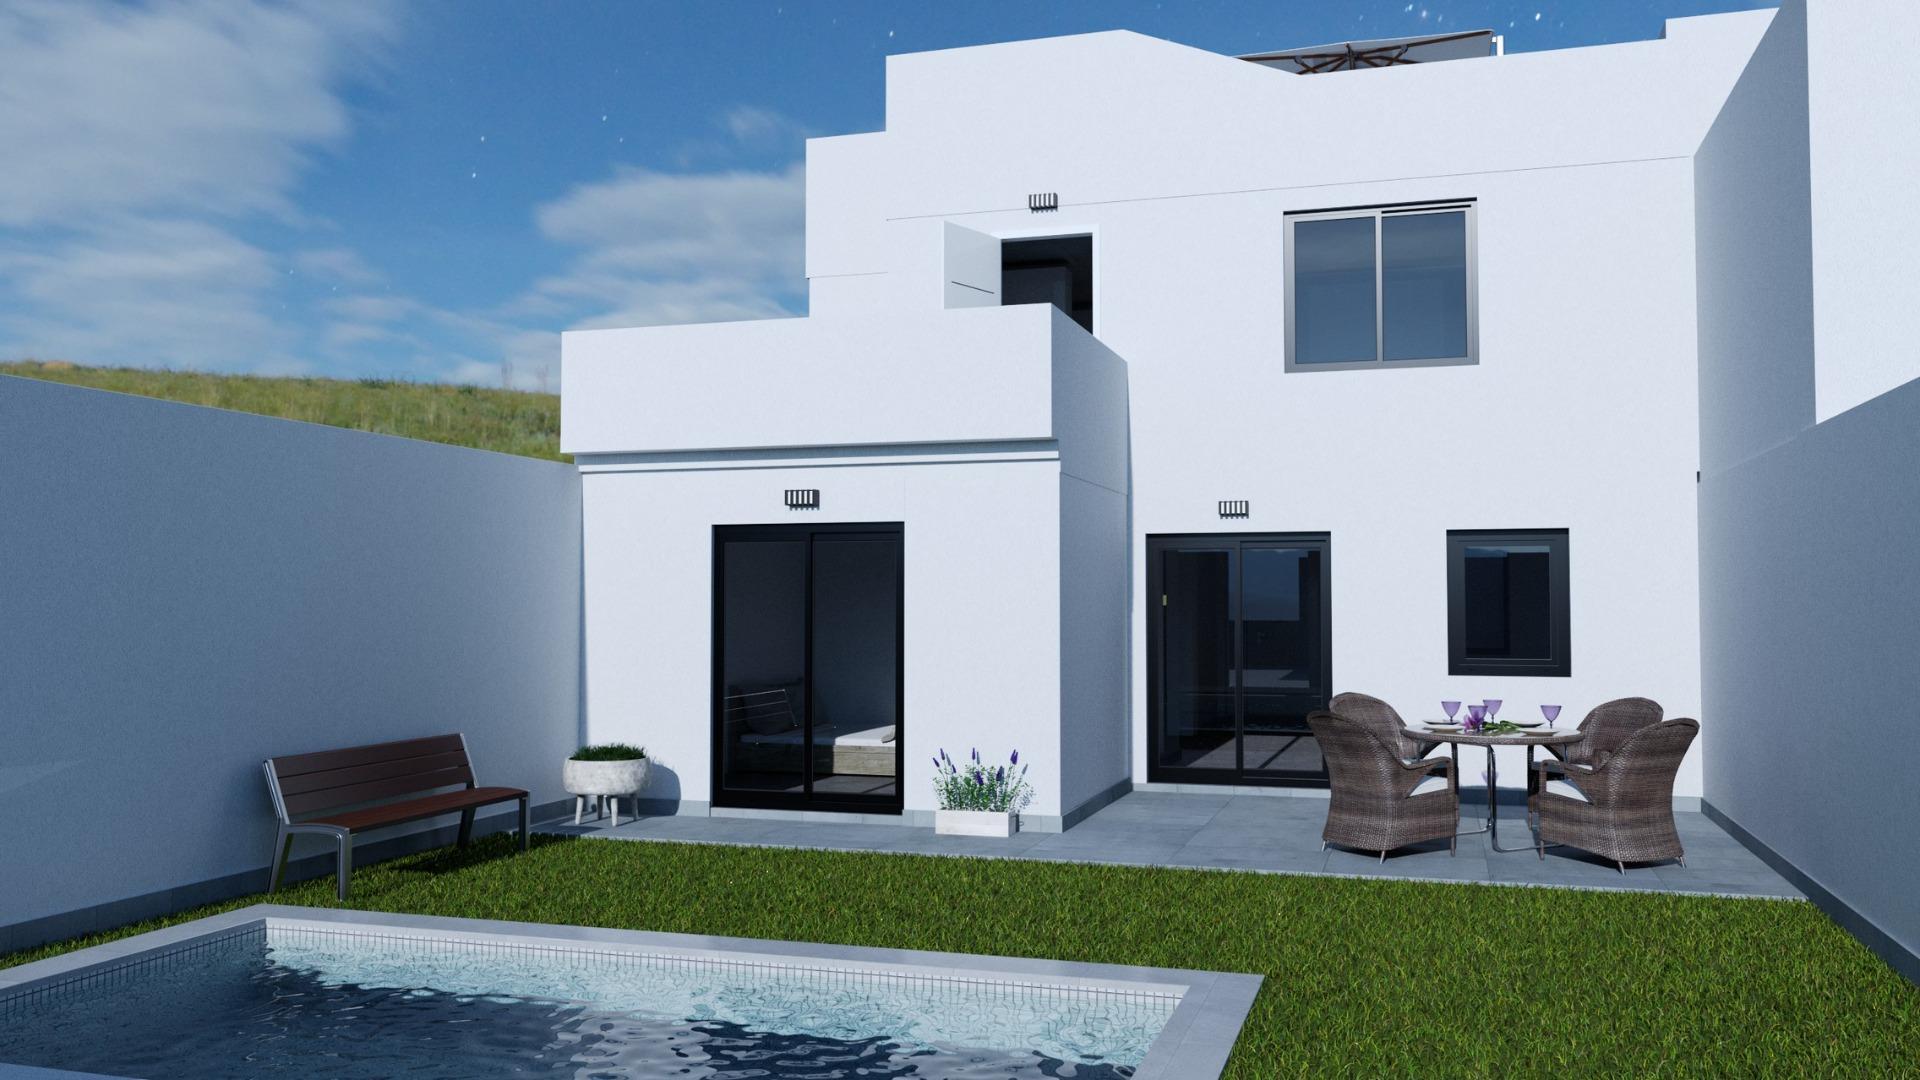 NEW BUILD DEVERLOPMENT IN LOS BELONES, LA MANGA MAR MENOR

New Build luxurious complex of 5 properties (3 townhouses and 2 villas) with private swimming pool, gated garage, interior patio, solarium with Summer kitchen and pre-installation for electric vehicle charging.

Each property has 4 bedrooms and 3 bathrooms, with a choice of 3 bigger bedrooms, designed with elegant and functional interiors, fully fitted kitchens, appliances included. 
The bedrooms include lined wardrobes with drawer units and also have pre-installation for ducted air conditioning.

Los Belones is a highly popular large village just a short drive from the famous La Manga Club and 1 km from sandy beaches of the warm Mar Menor and 3km to the beautiful Mediterranean sea.

The village is a thriving environment typically Spanish offering a great selection of tapas bars, restaurants and an abundance of amenities. Every Tuesday there is a weekly market which is very popular with locals and tourists.

Within a 20 minute drive to the historical port of Cartagena.

Airports: Murcia regional airport (Corvera) is 35 minute drive and Alicante airport 75 minute drive.